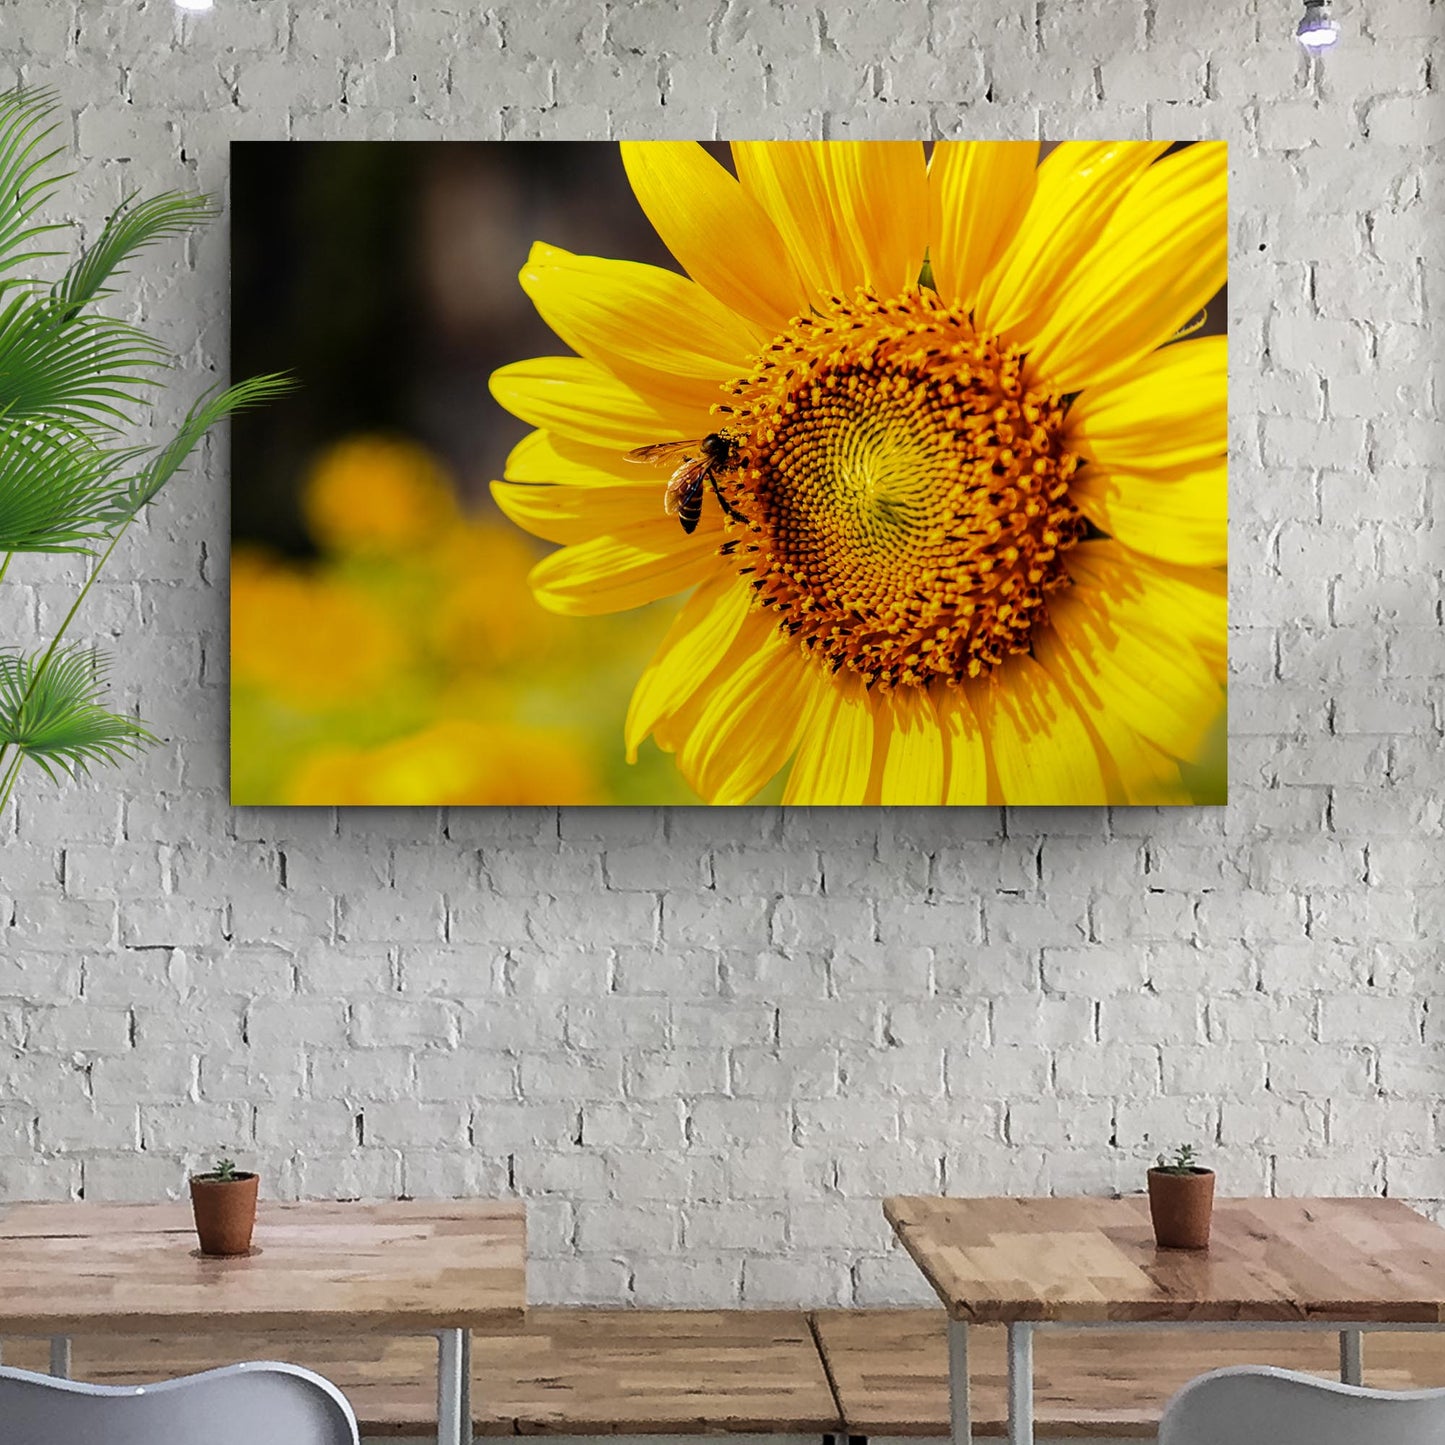 Bee On Sunflower Canvas Wall Art Style 2 - Image by Tailored Canvases